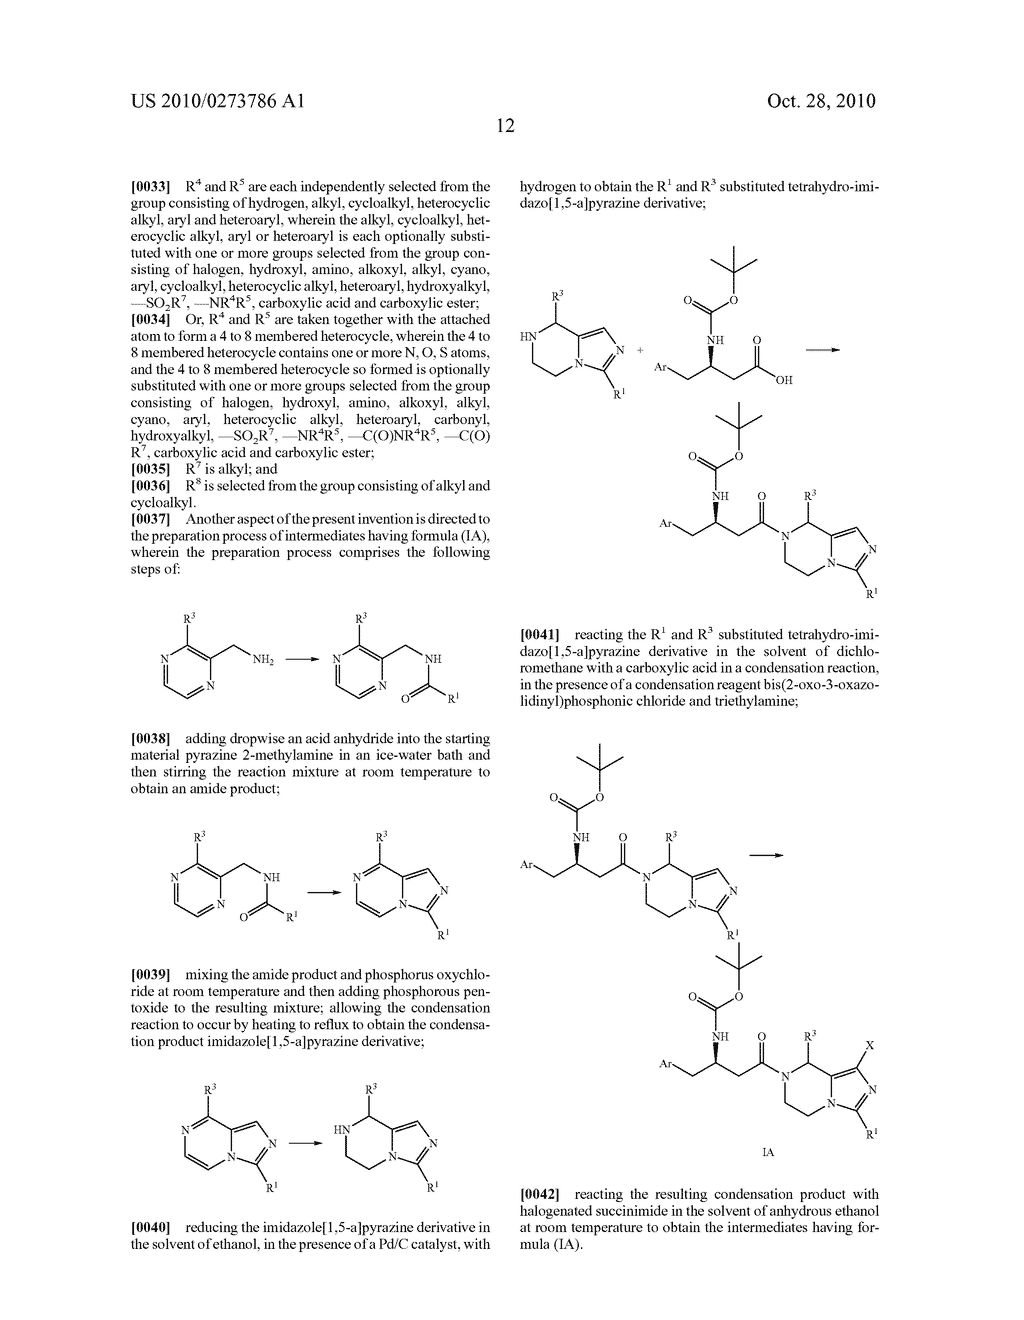 TETRAHYDRO-IMIDAZ0[1,5-A]PYRAZINE DERIVATIVES, PREPARATION PROCESS AND MEDICINAL USE THEREOF - diagram, schematic, and image 13